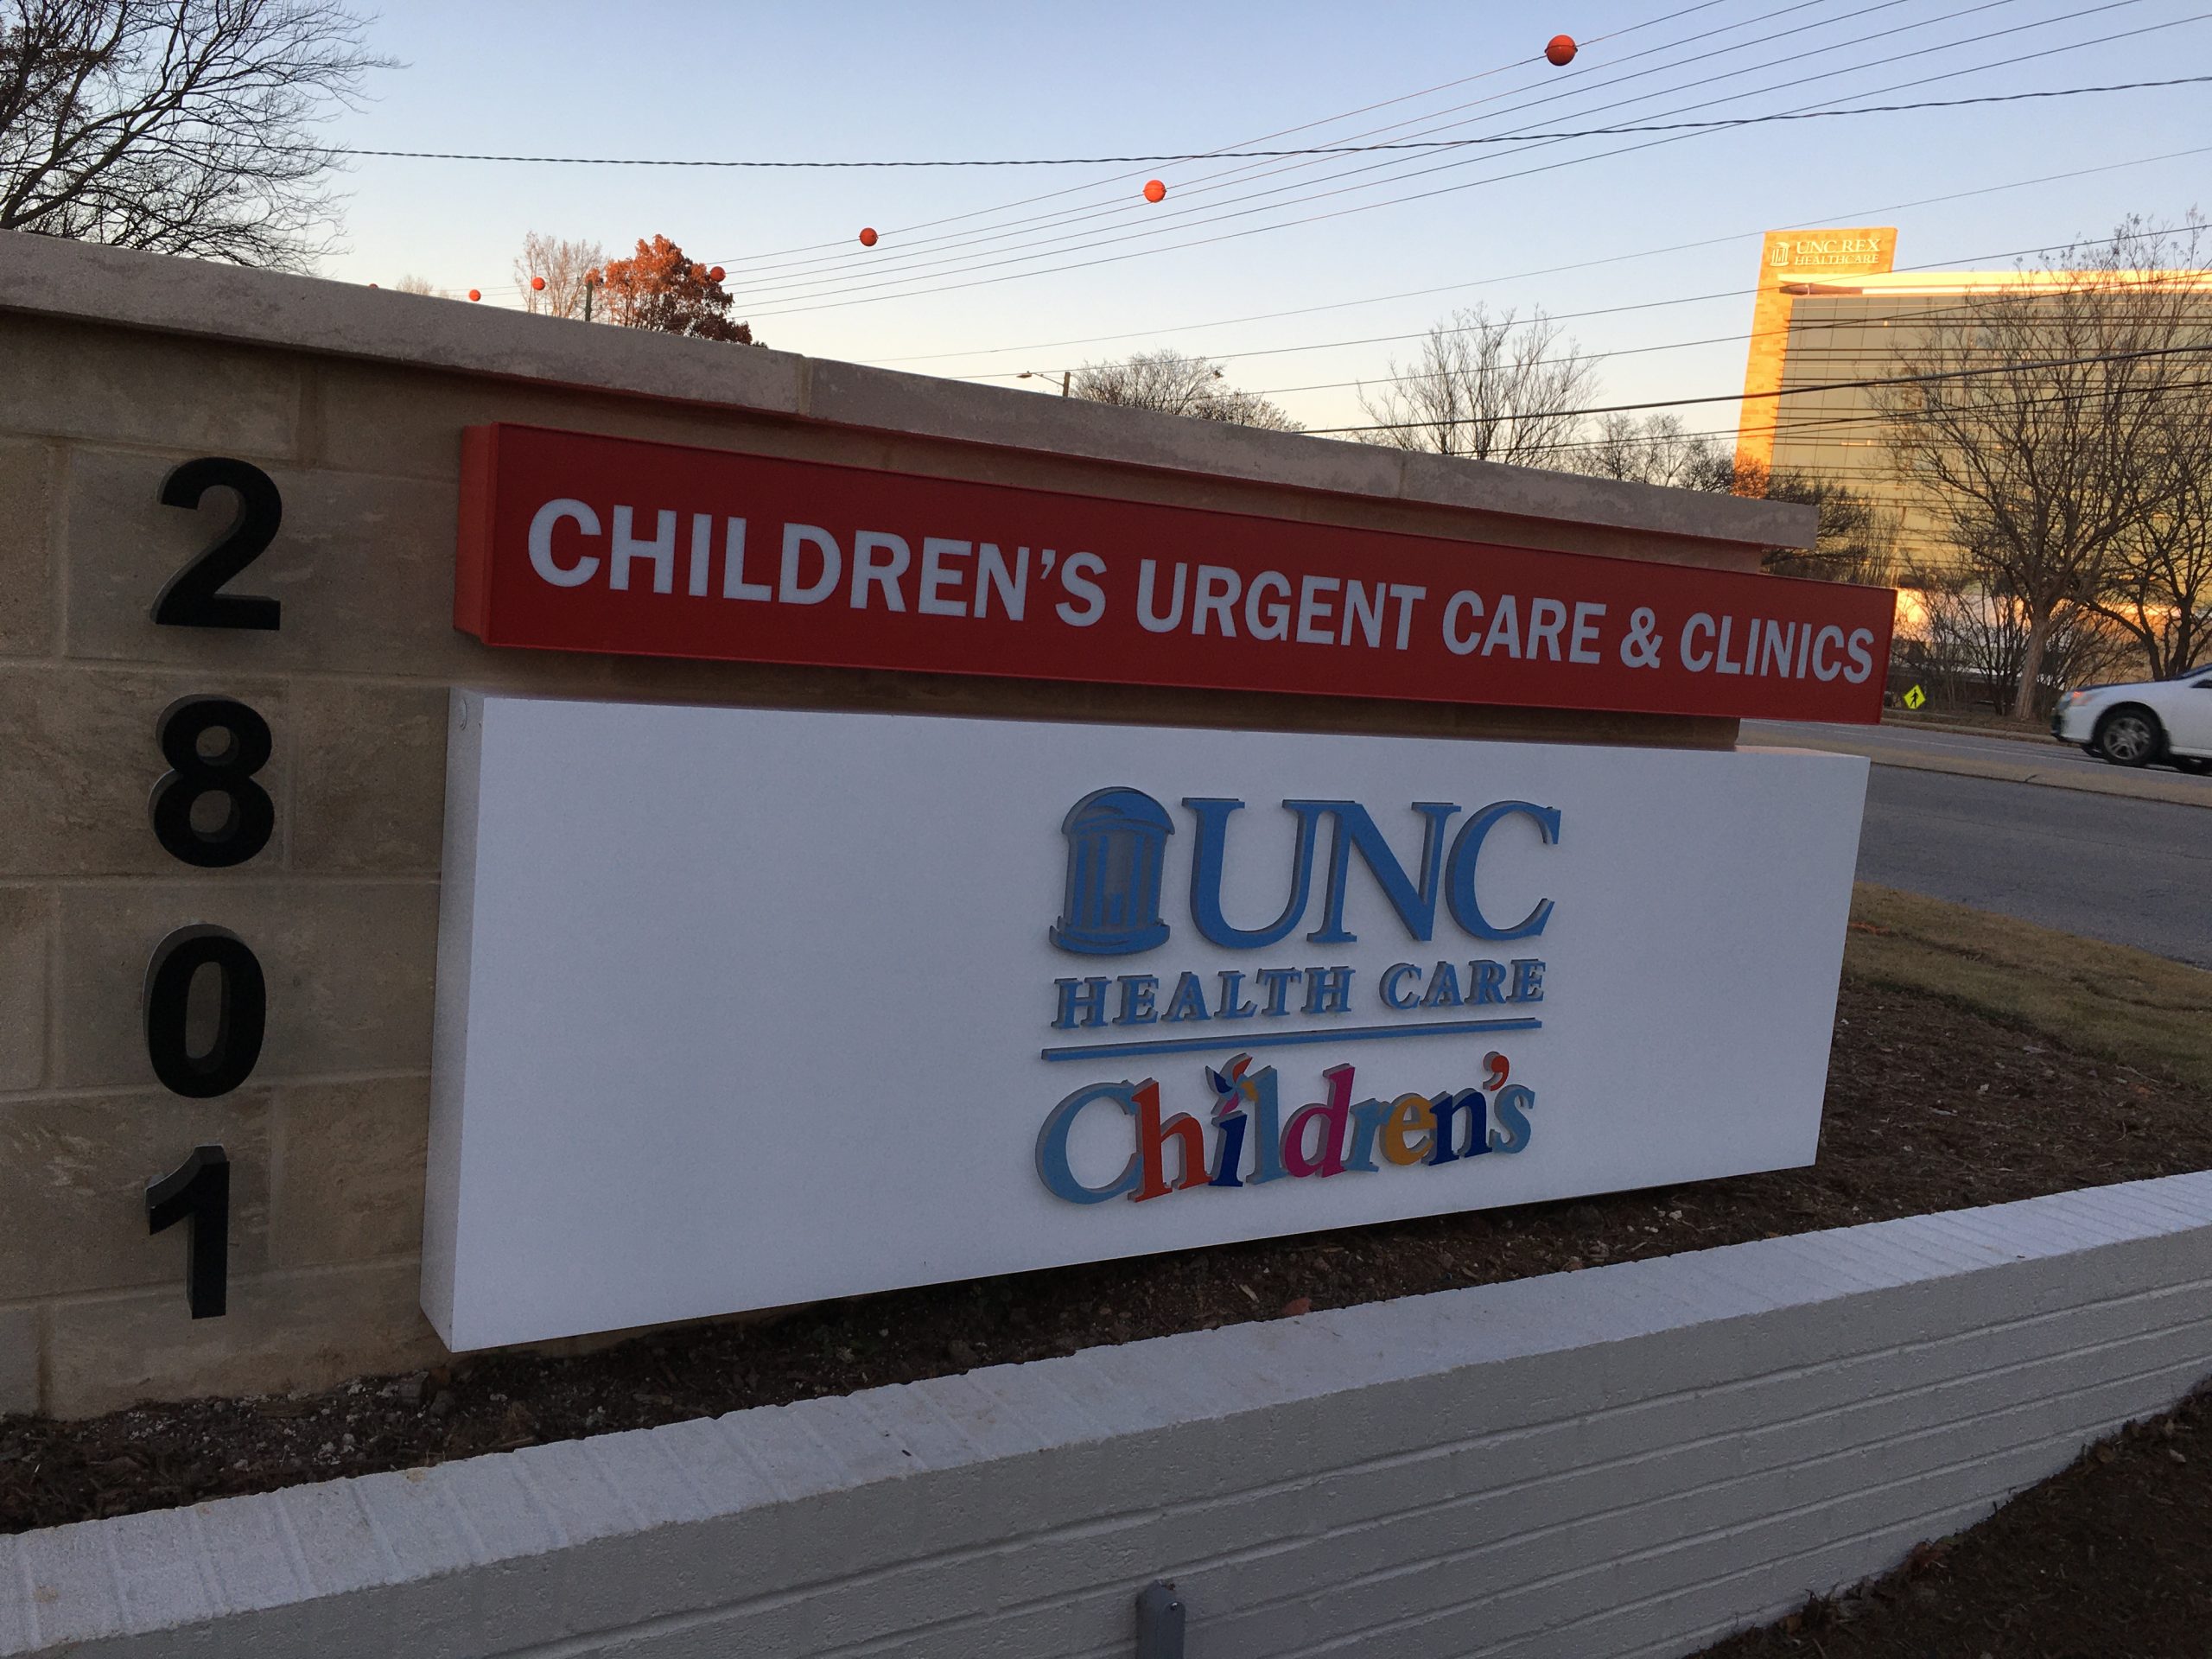 unc health care expands services available for children in wake county image2 scaled 2